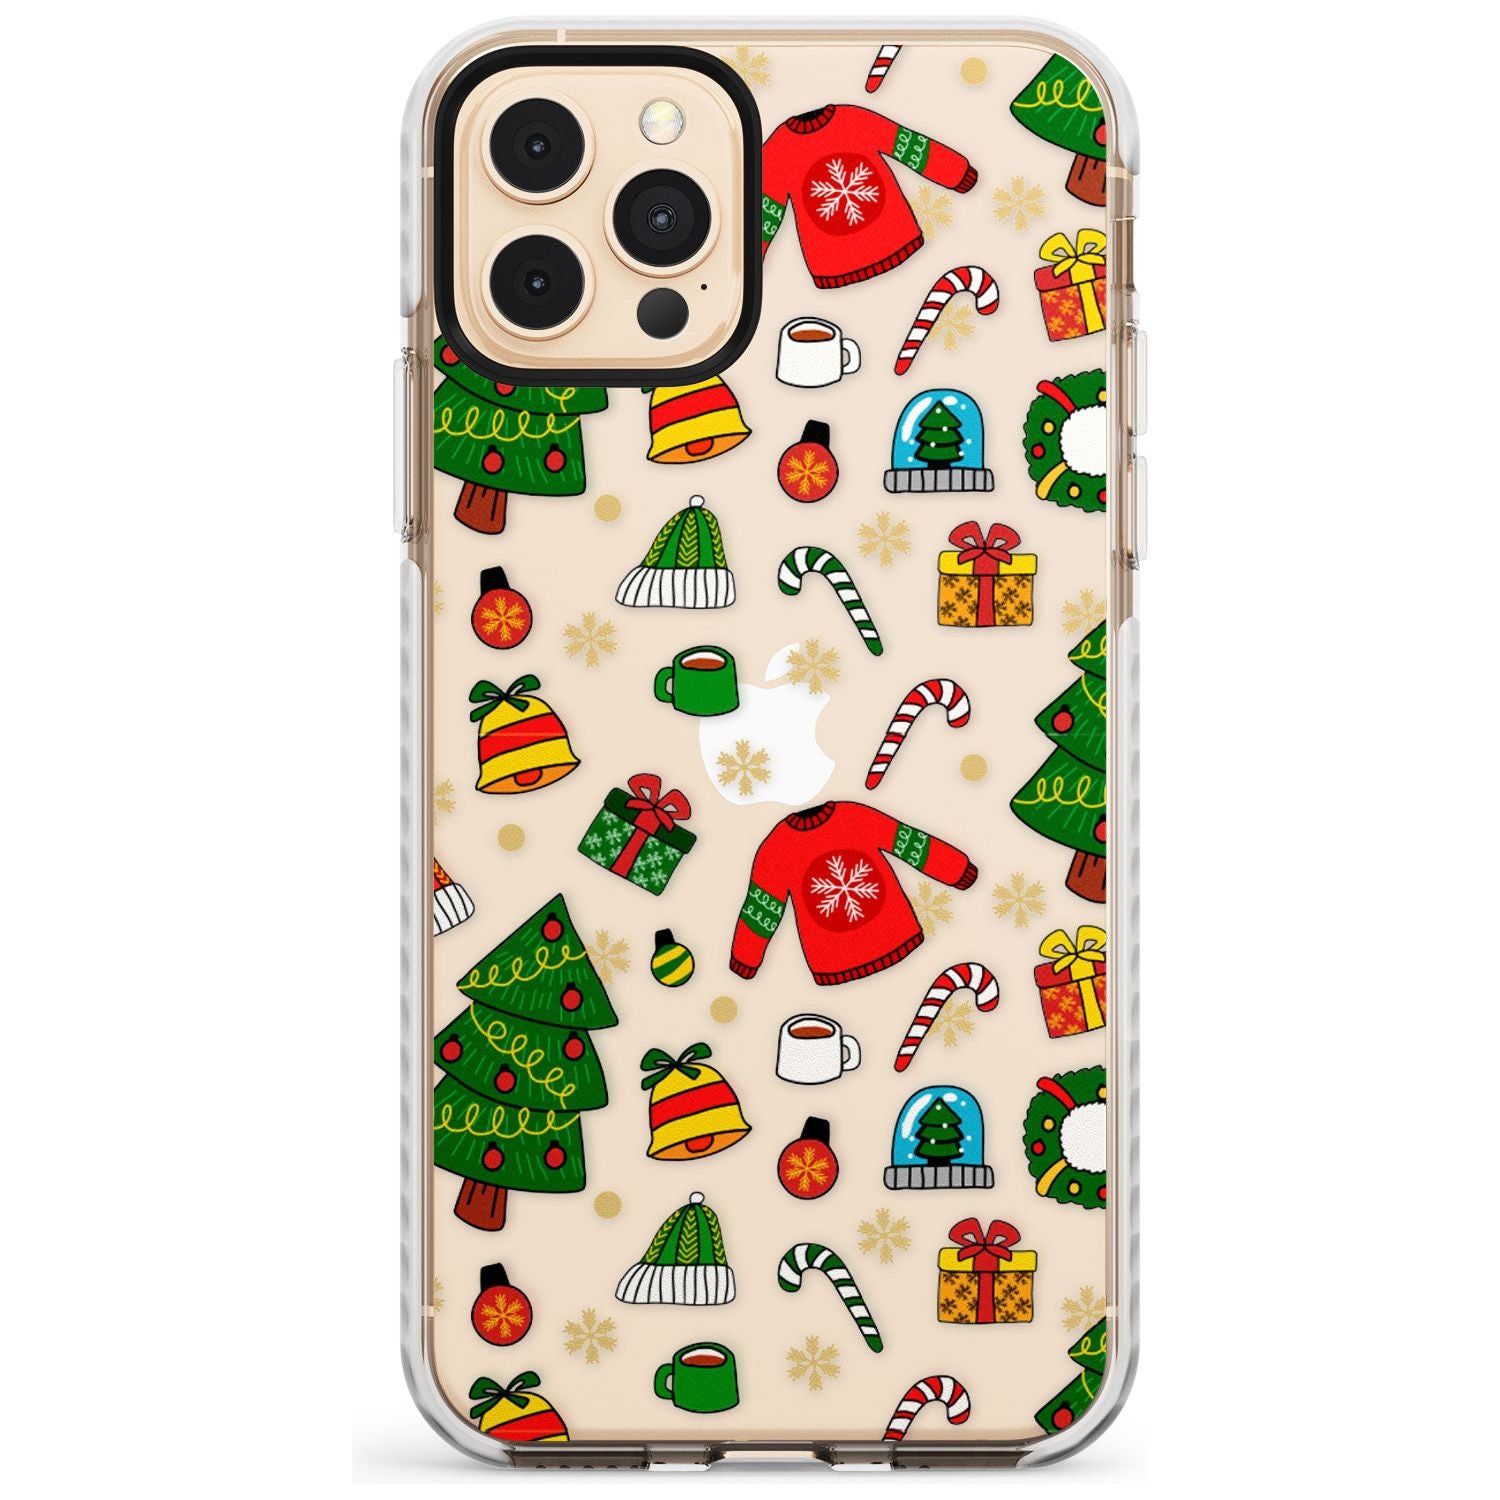 Christmas Mixture Pattern Impact Phone Case for iPhone 11 Pro Max